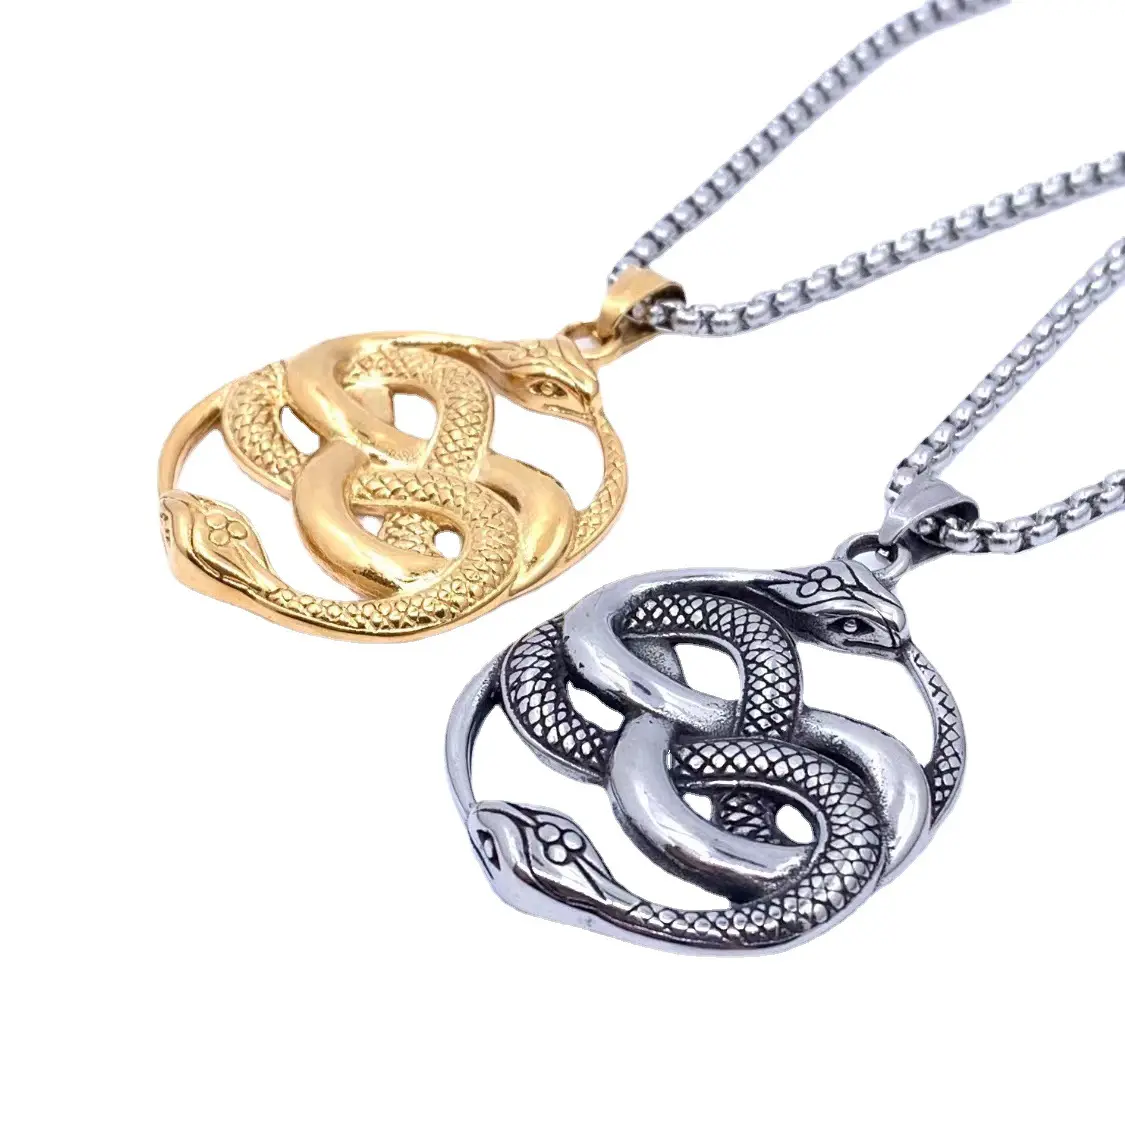 Stainless Steel Double Snake Necklace Never Ending Storys Serpent Snake Infinity Knot Fashion Pendant